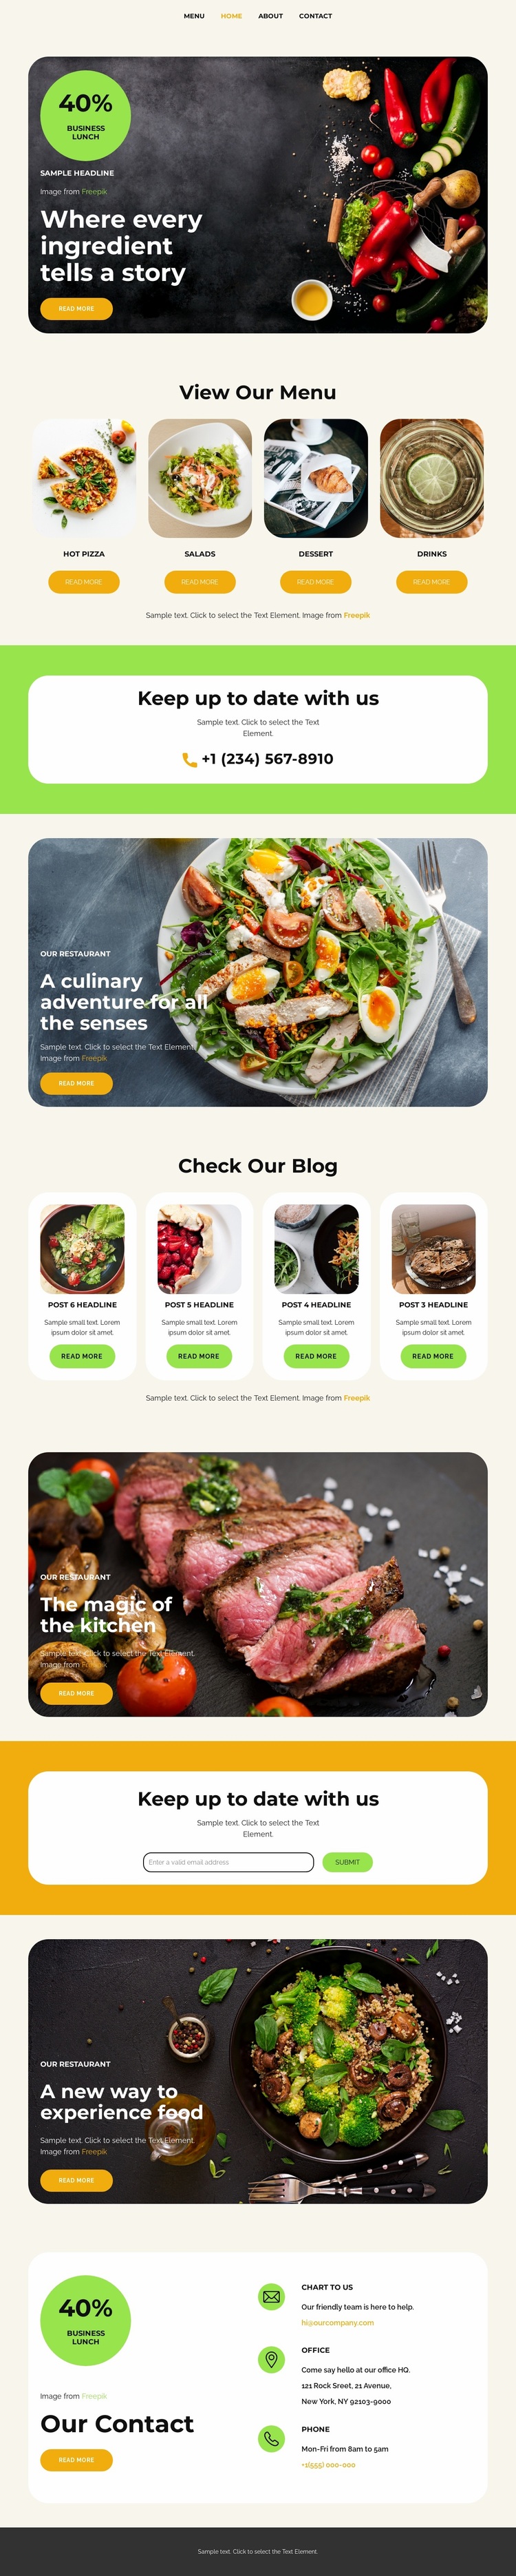 The magic of the kitchen Website Design